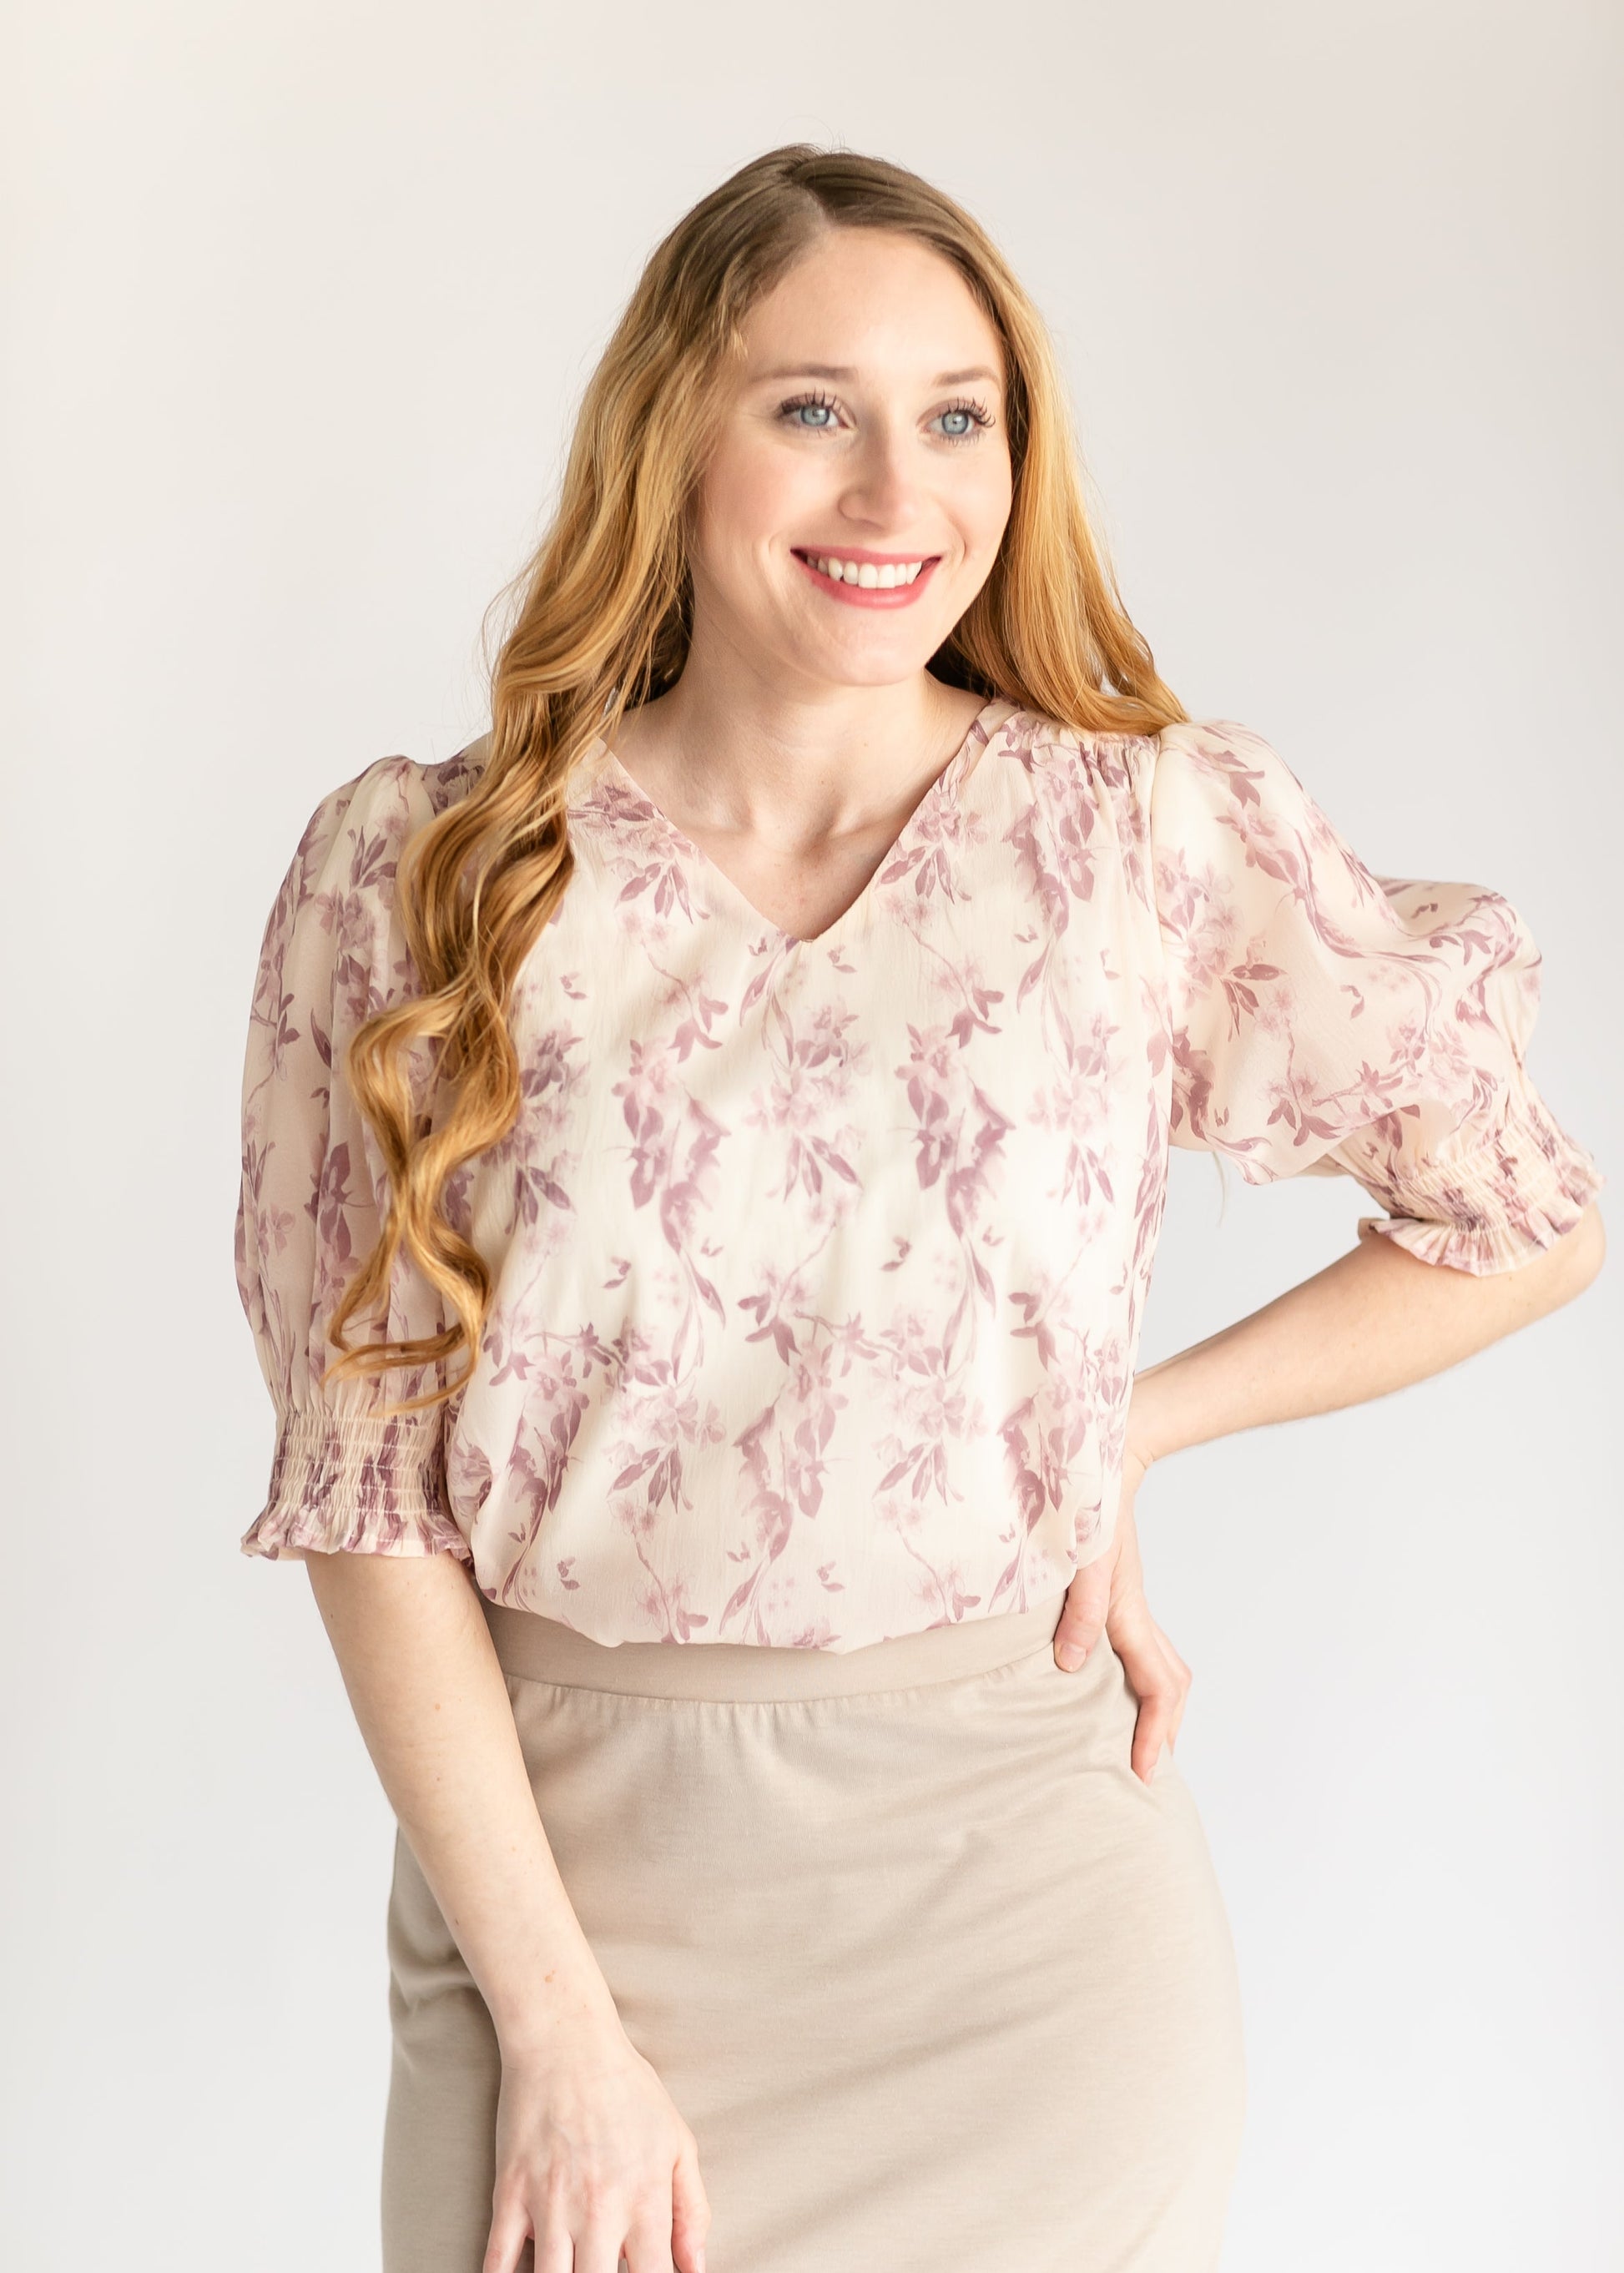 Floral Print Puff Blouse Top FF Tops